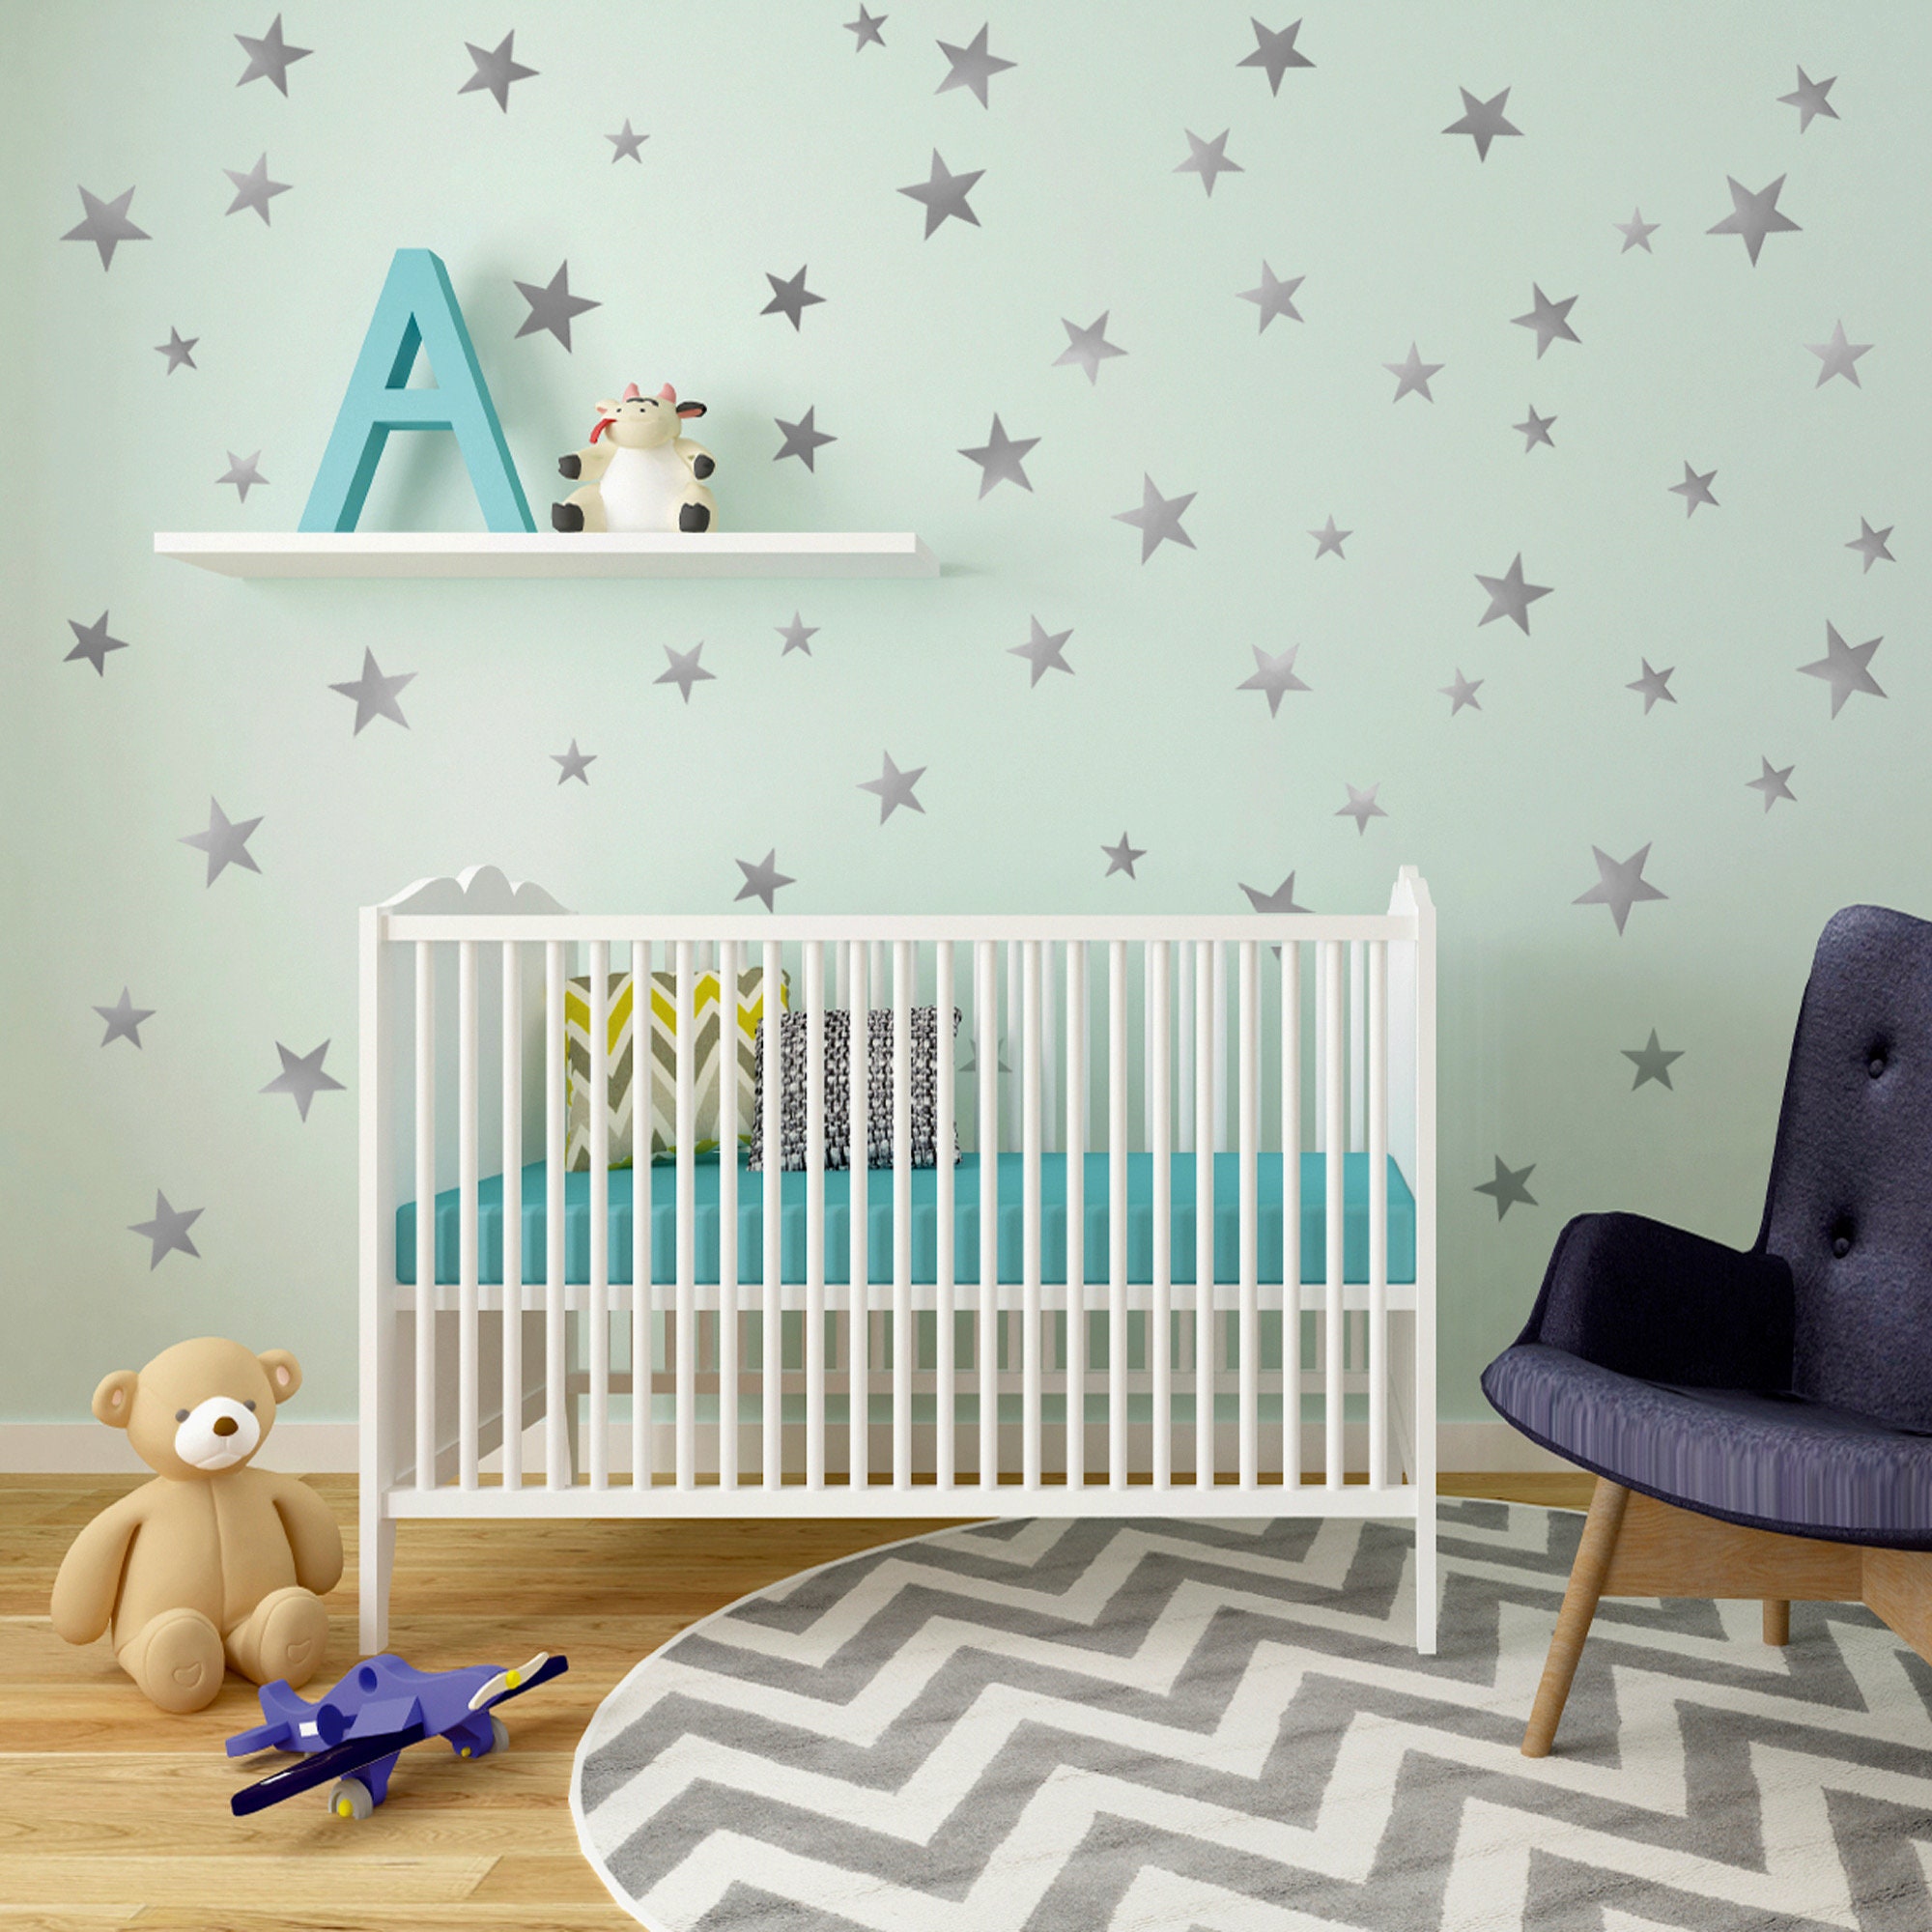 Gold stars wall decal vinyl stickers – Little Lux Interiors